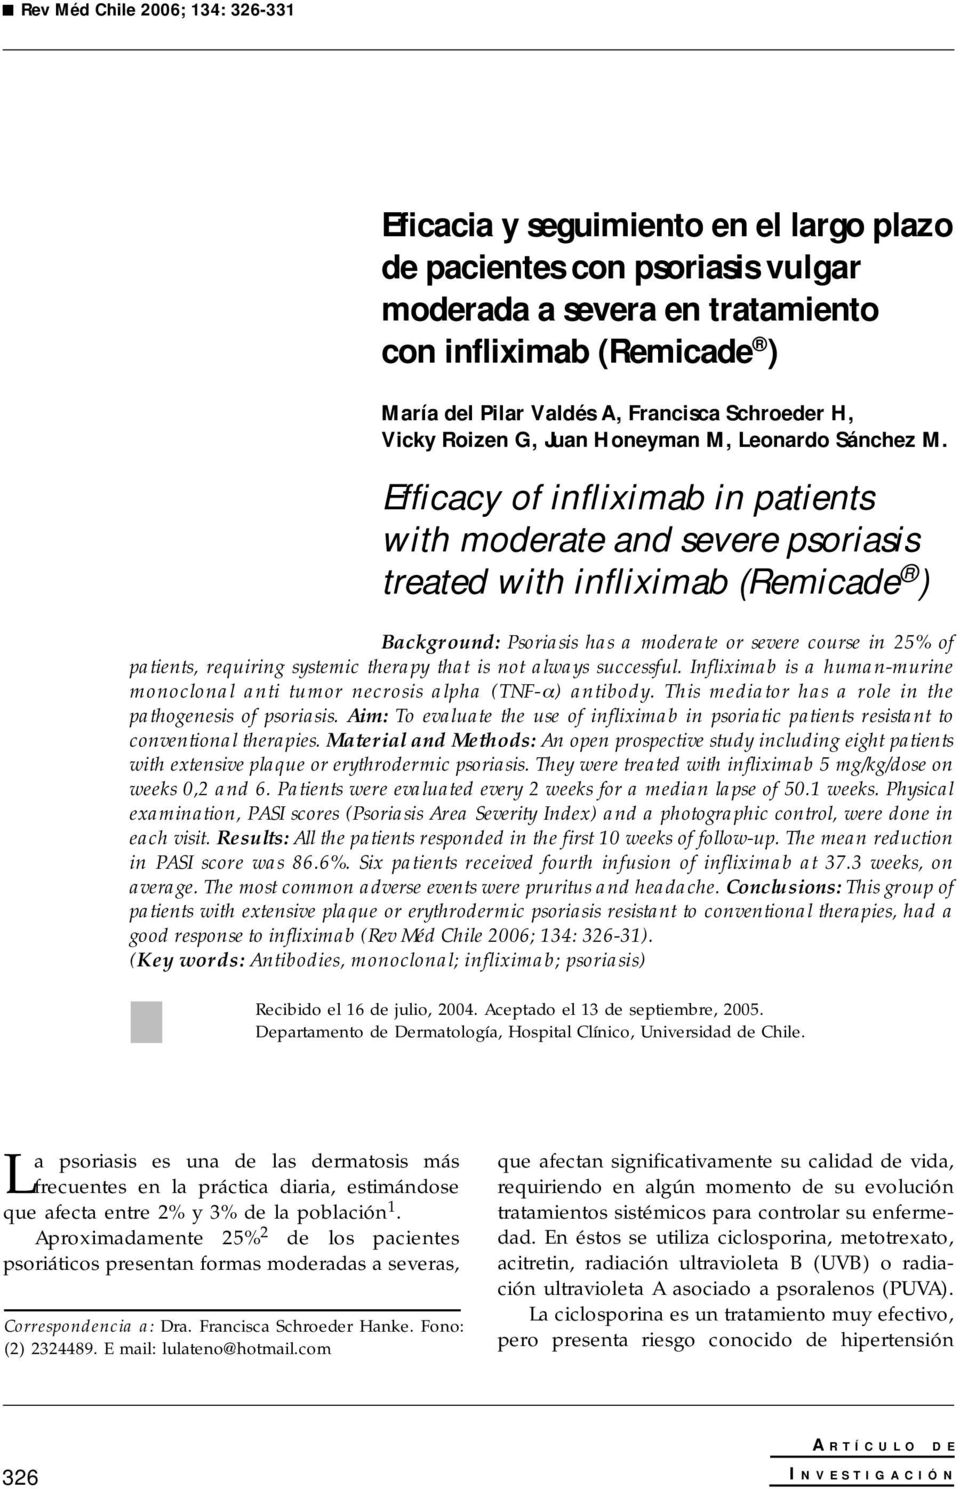 Efficacy of infliximab in patients with moderate and severe psoriasis treated with infliximab (Remicade ) Background: Psoriasis has a moderate or severe course in 25% of patients, requiring systemic